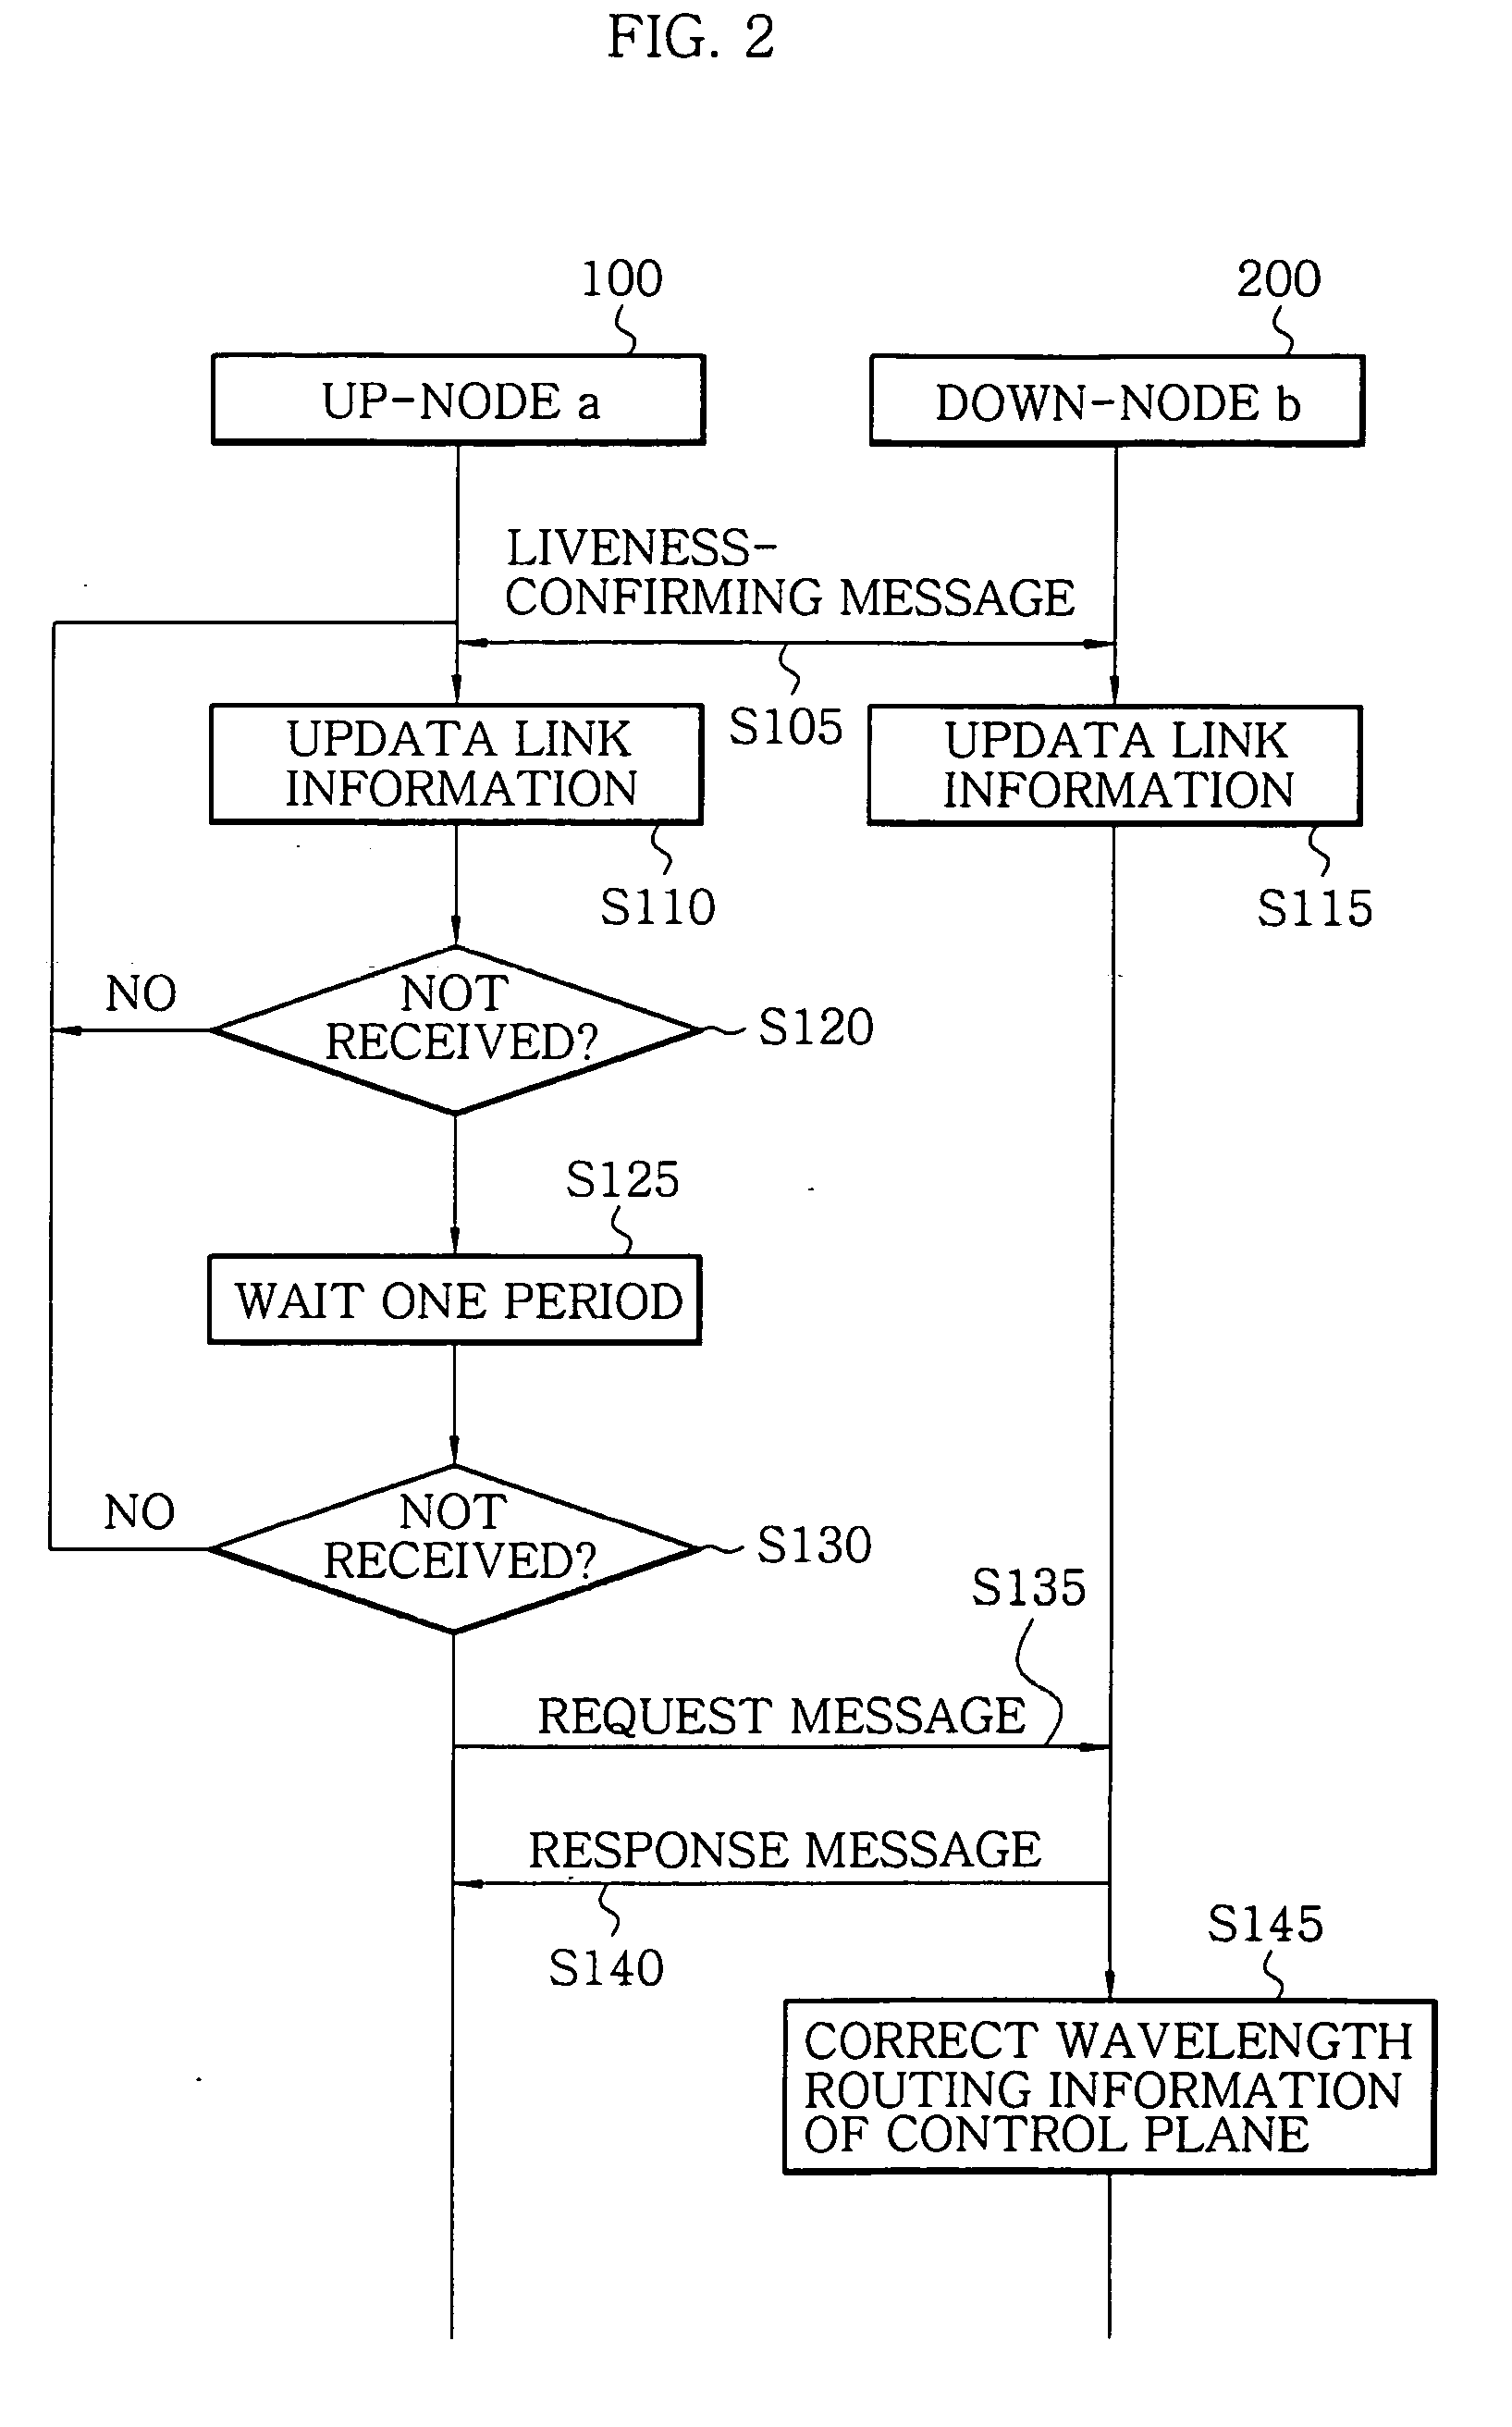 Method for protecting and restoring link using optical label merging and dynamic resource sharing with network load